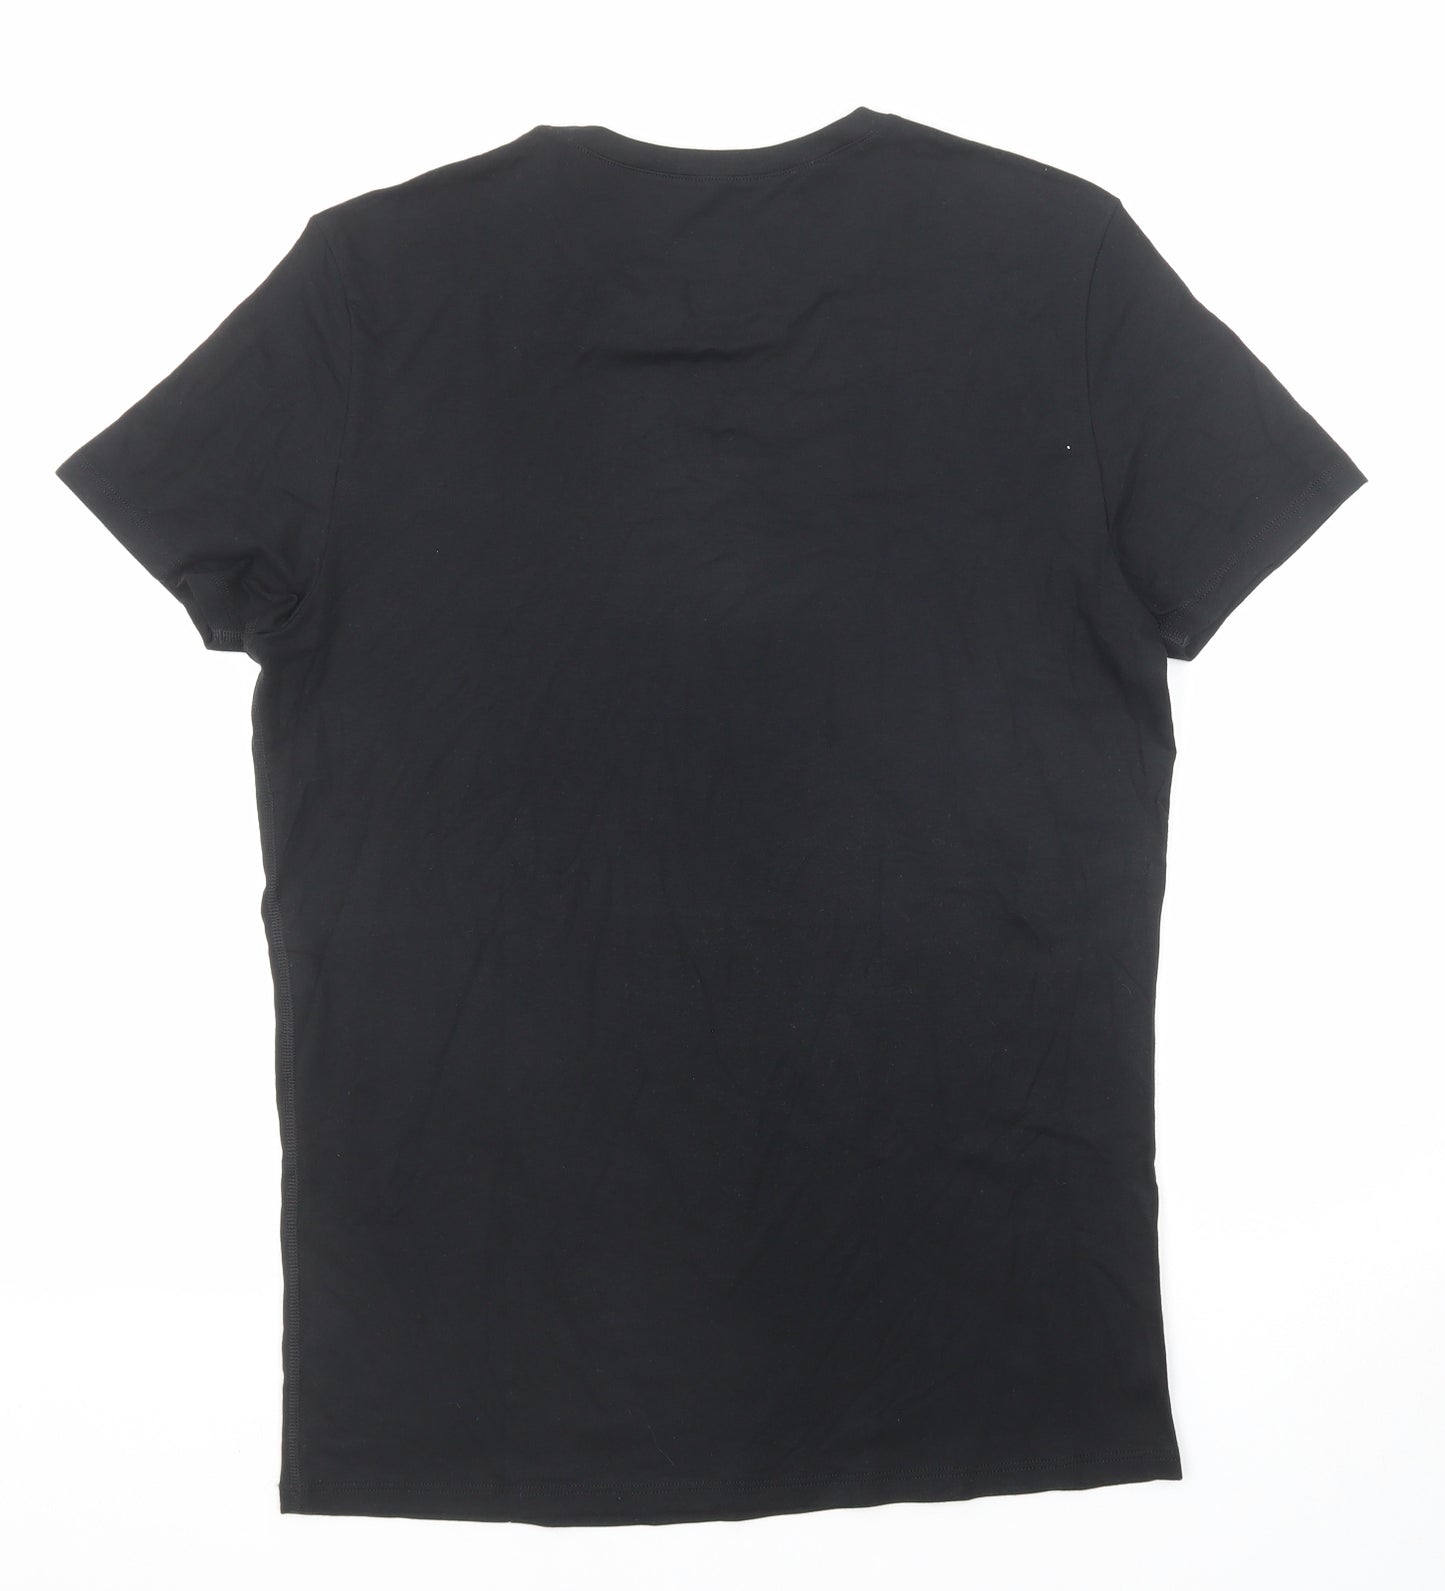 Marks and Spencer Mens Black Polyester T-Shirt Size M Round Neck - Unisex